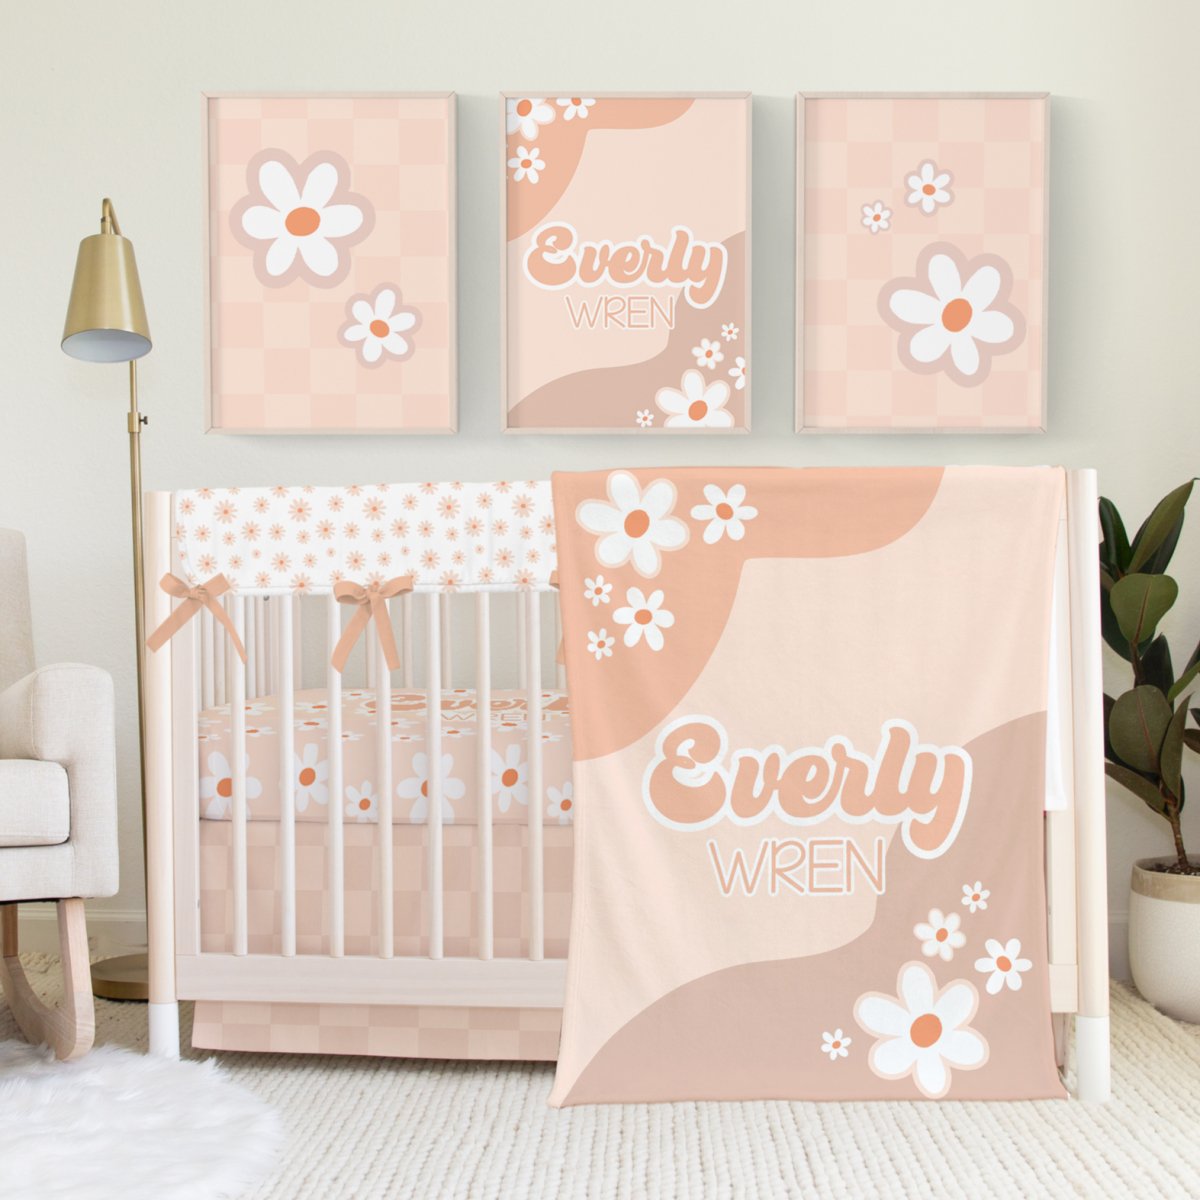 Daisy Floral on White Crib Bedding - Daisy, gender_girl, text